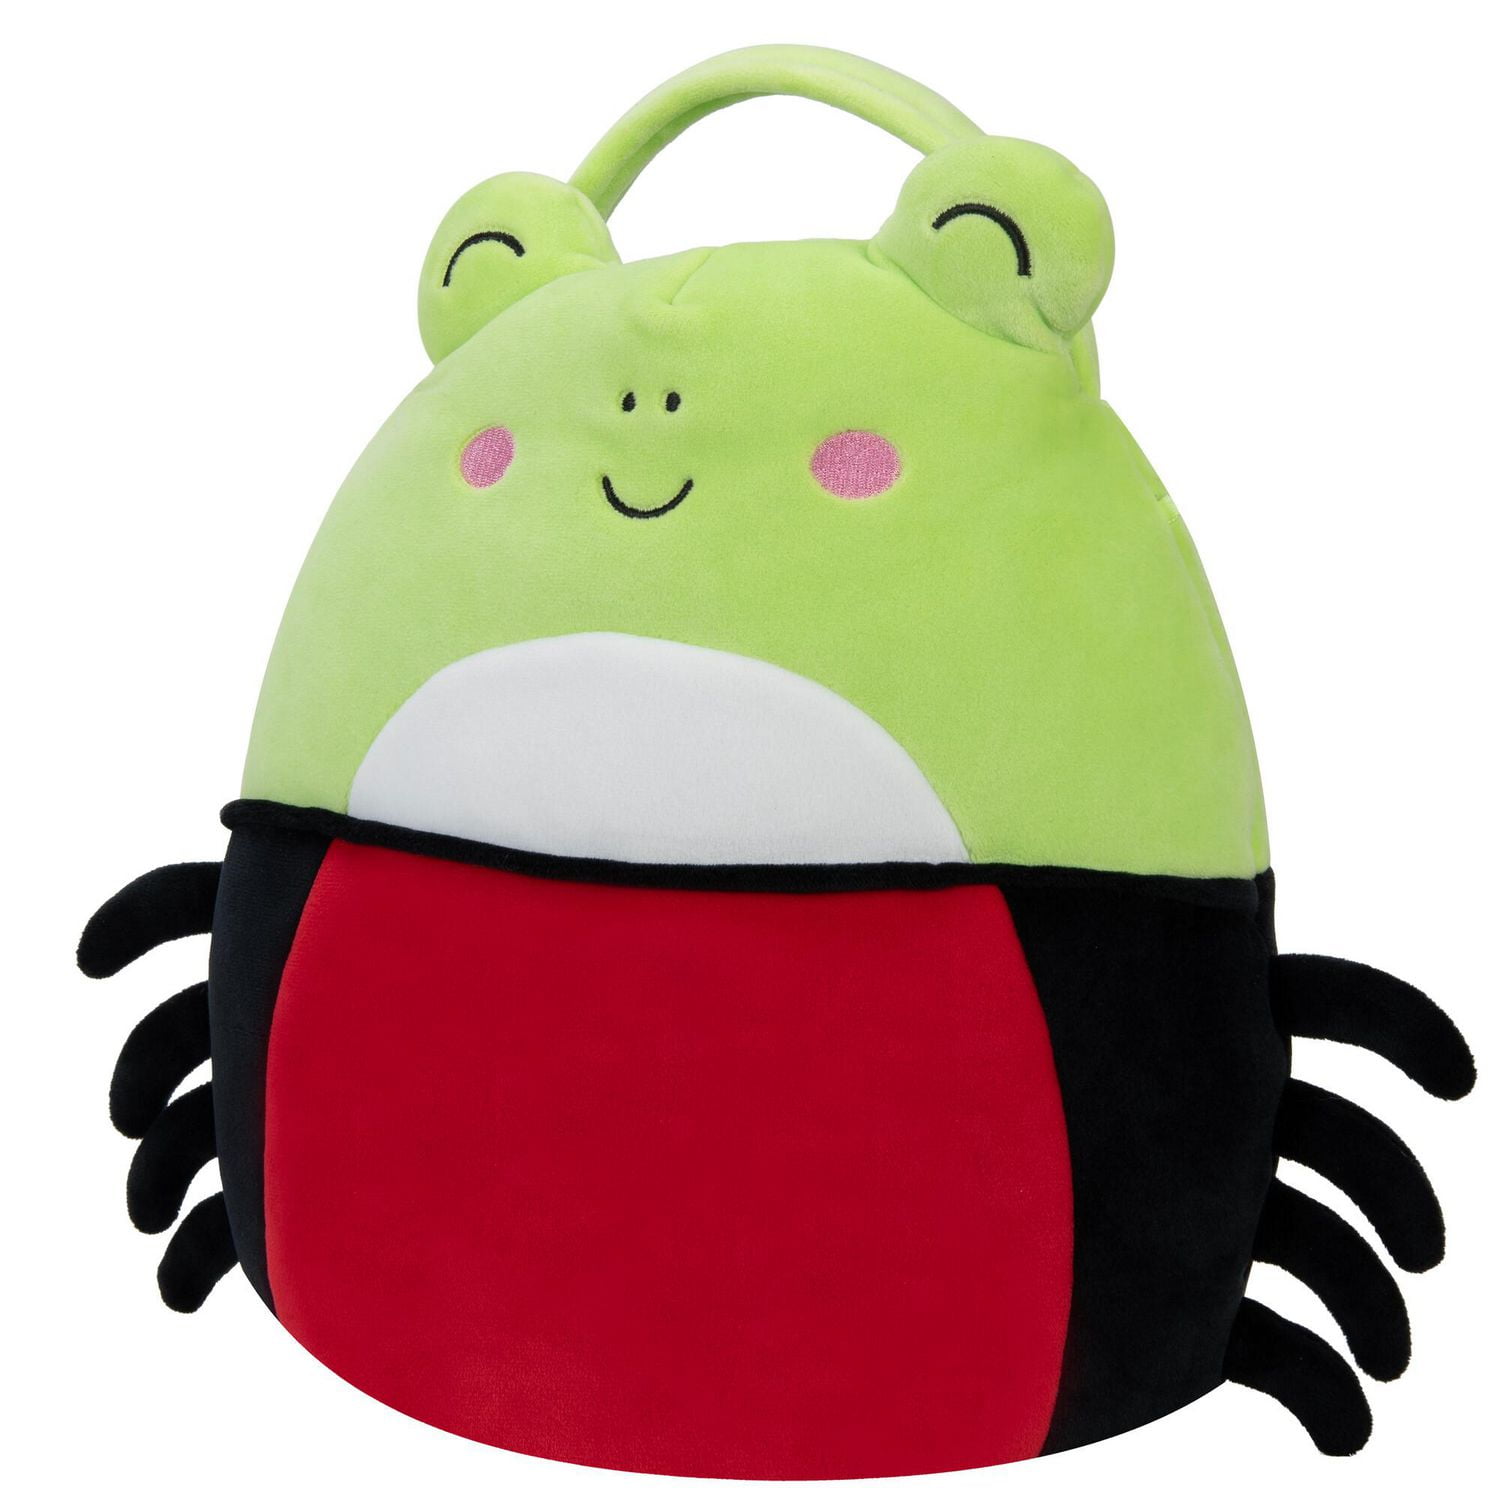 Squishmallows Original Wendy the Spider Frog Treat Pail